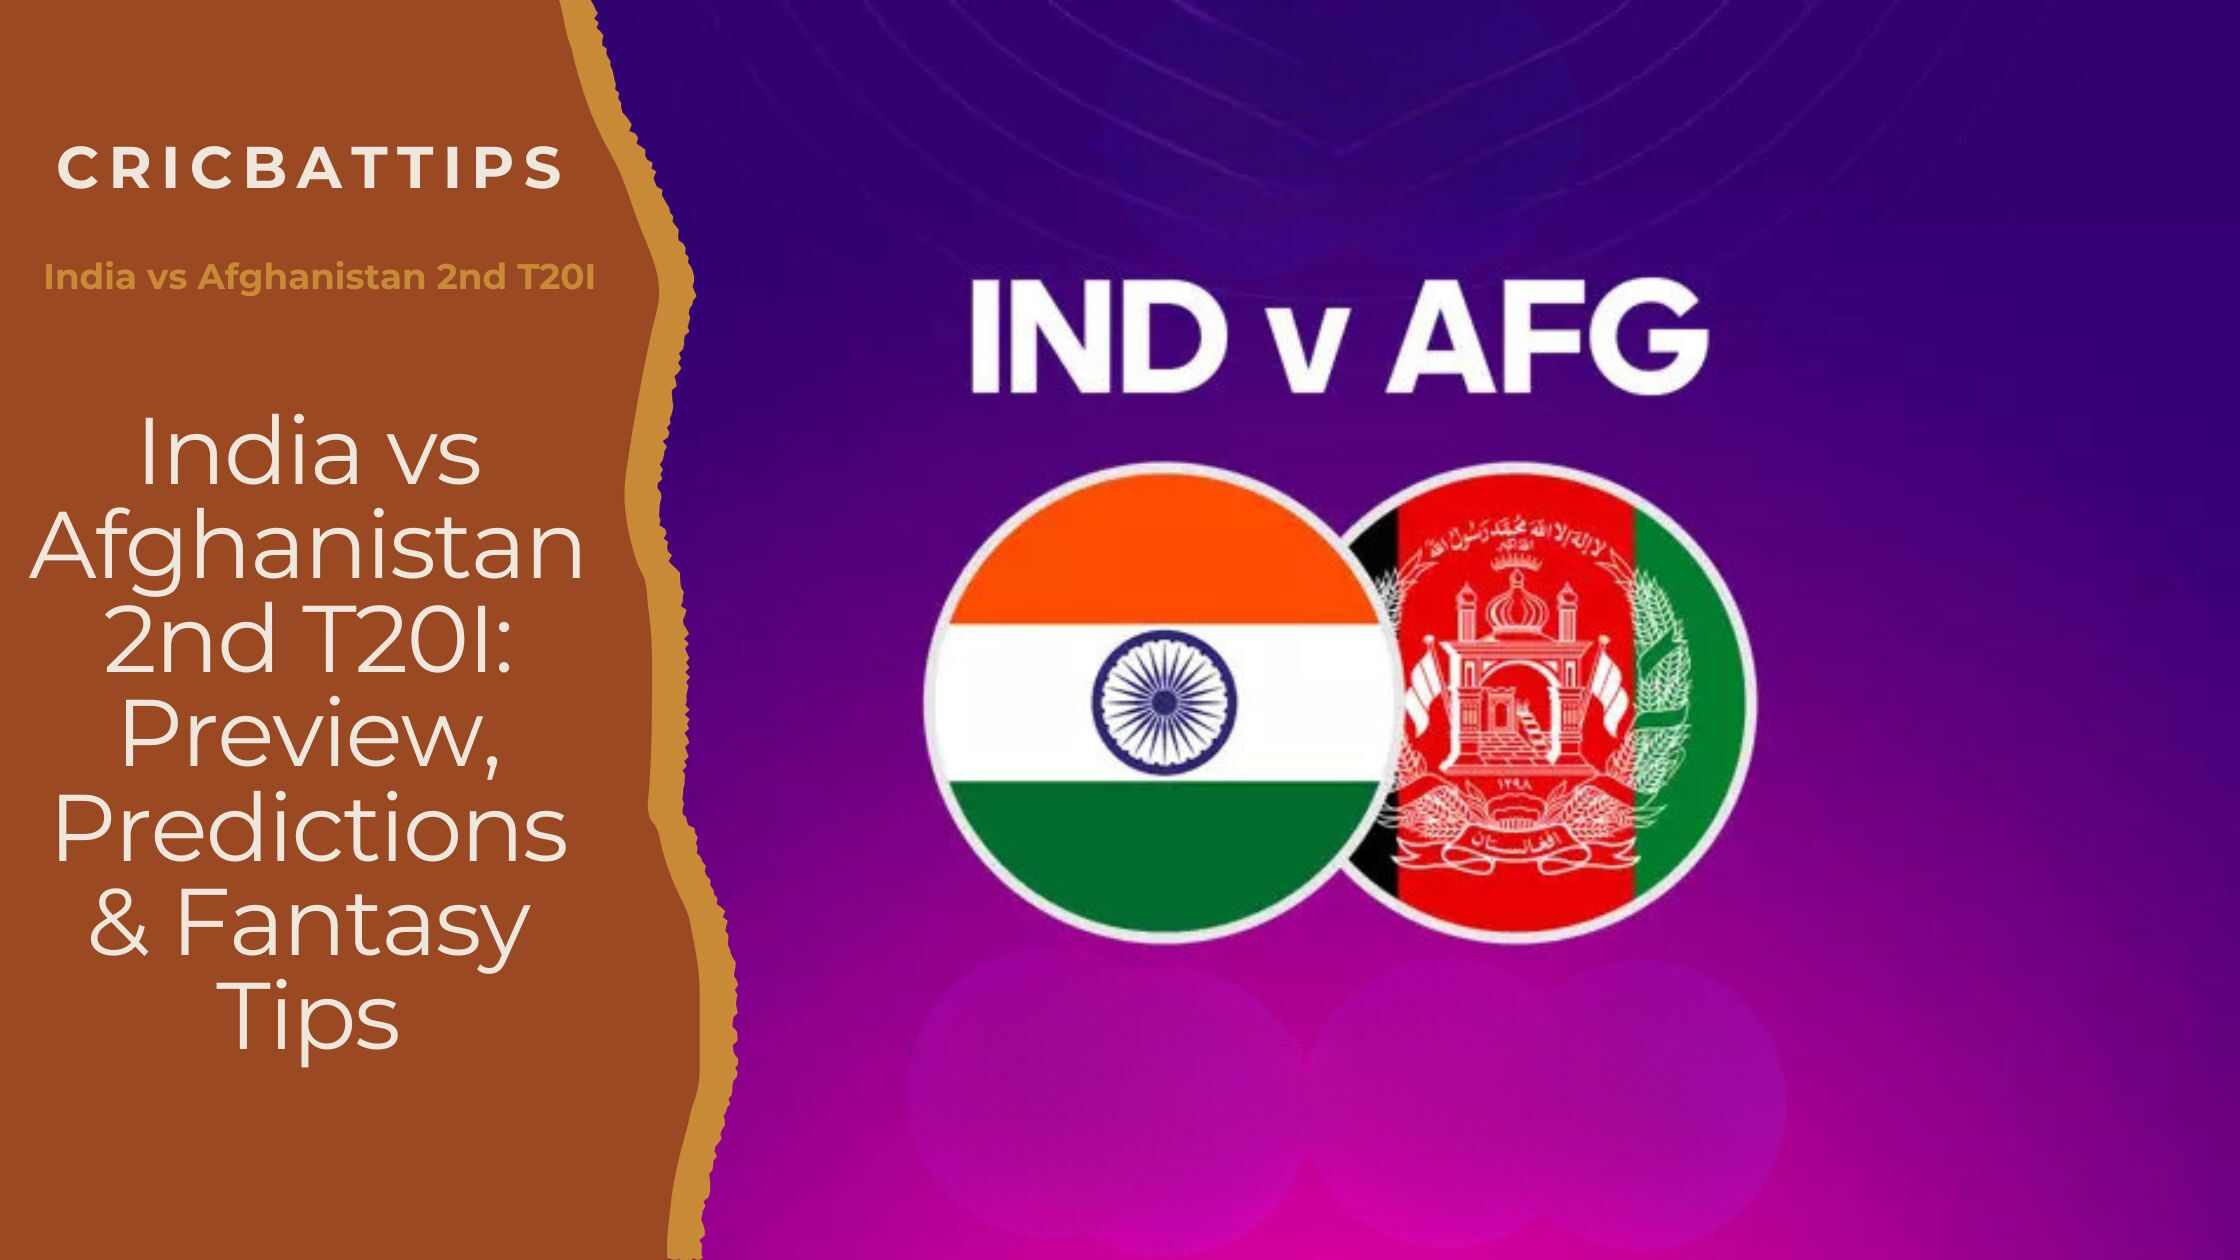 India vs Afghanistan 2nd T20I Preview, Predictions & Fantasy Tips